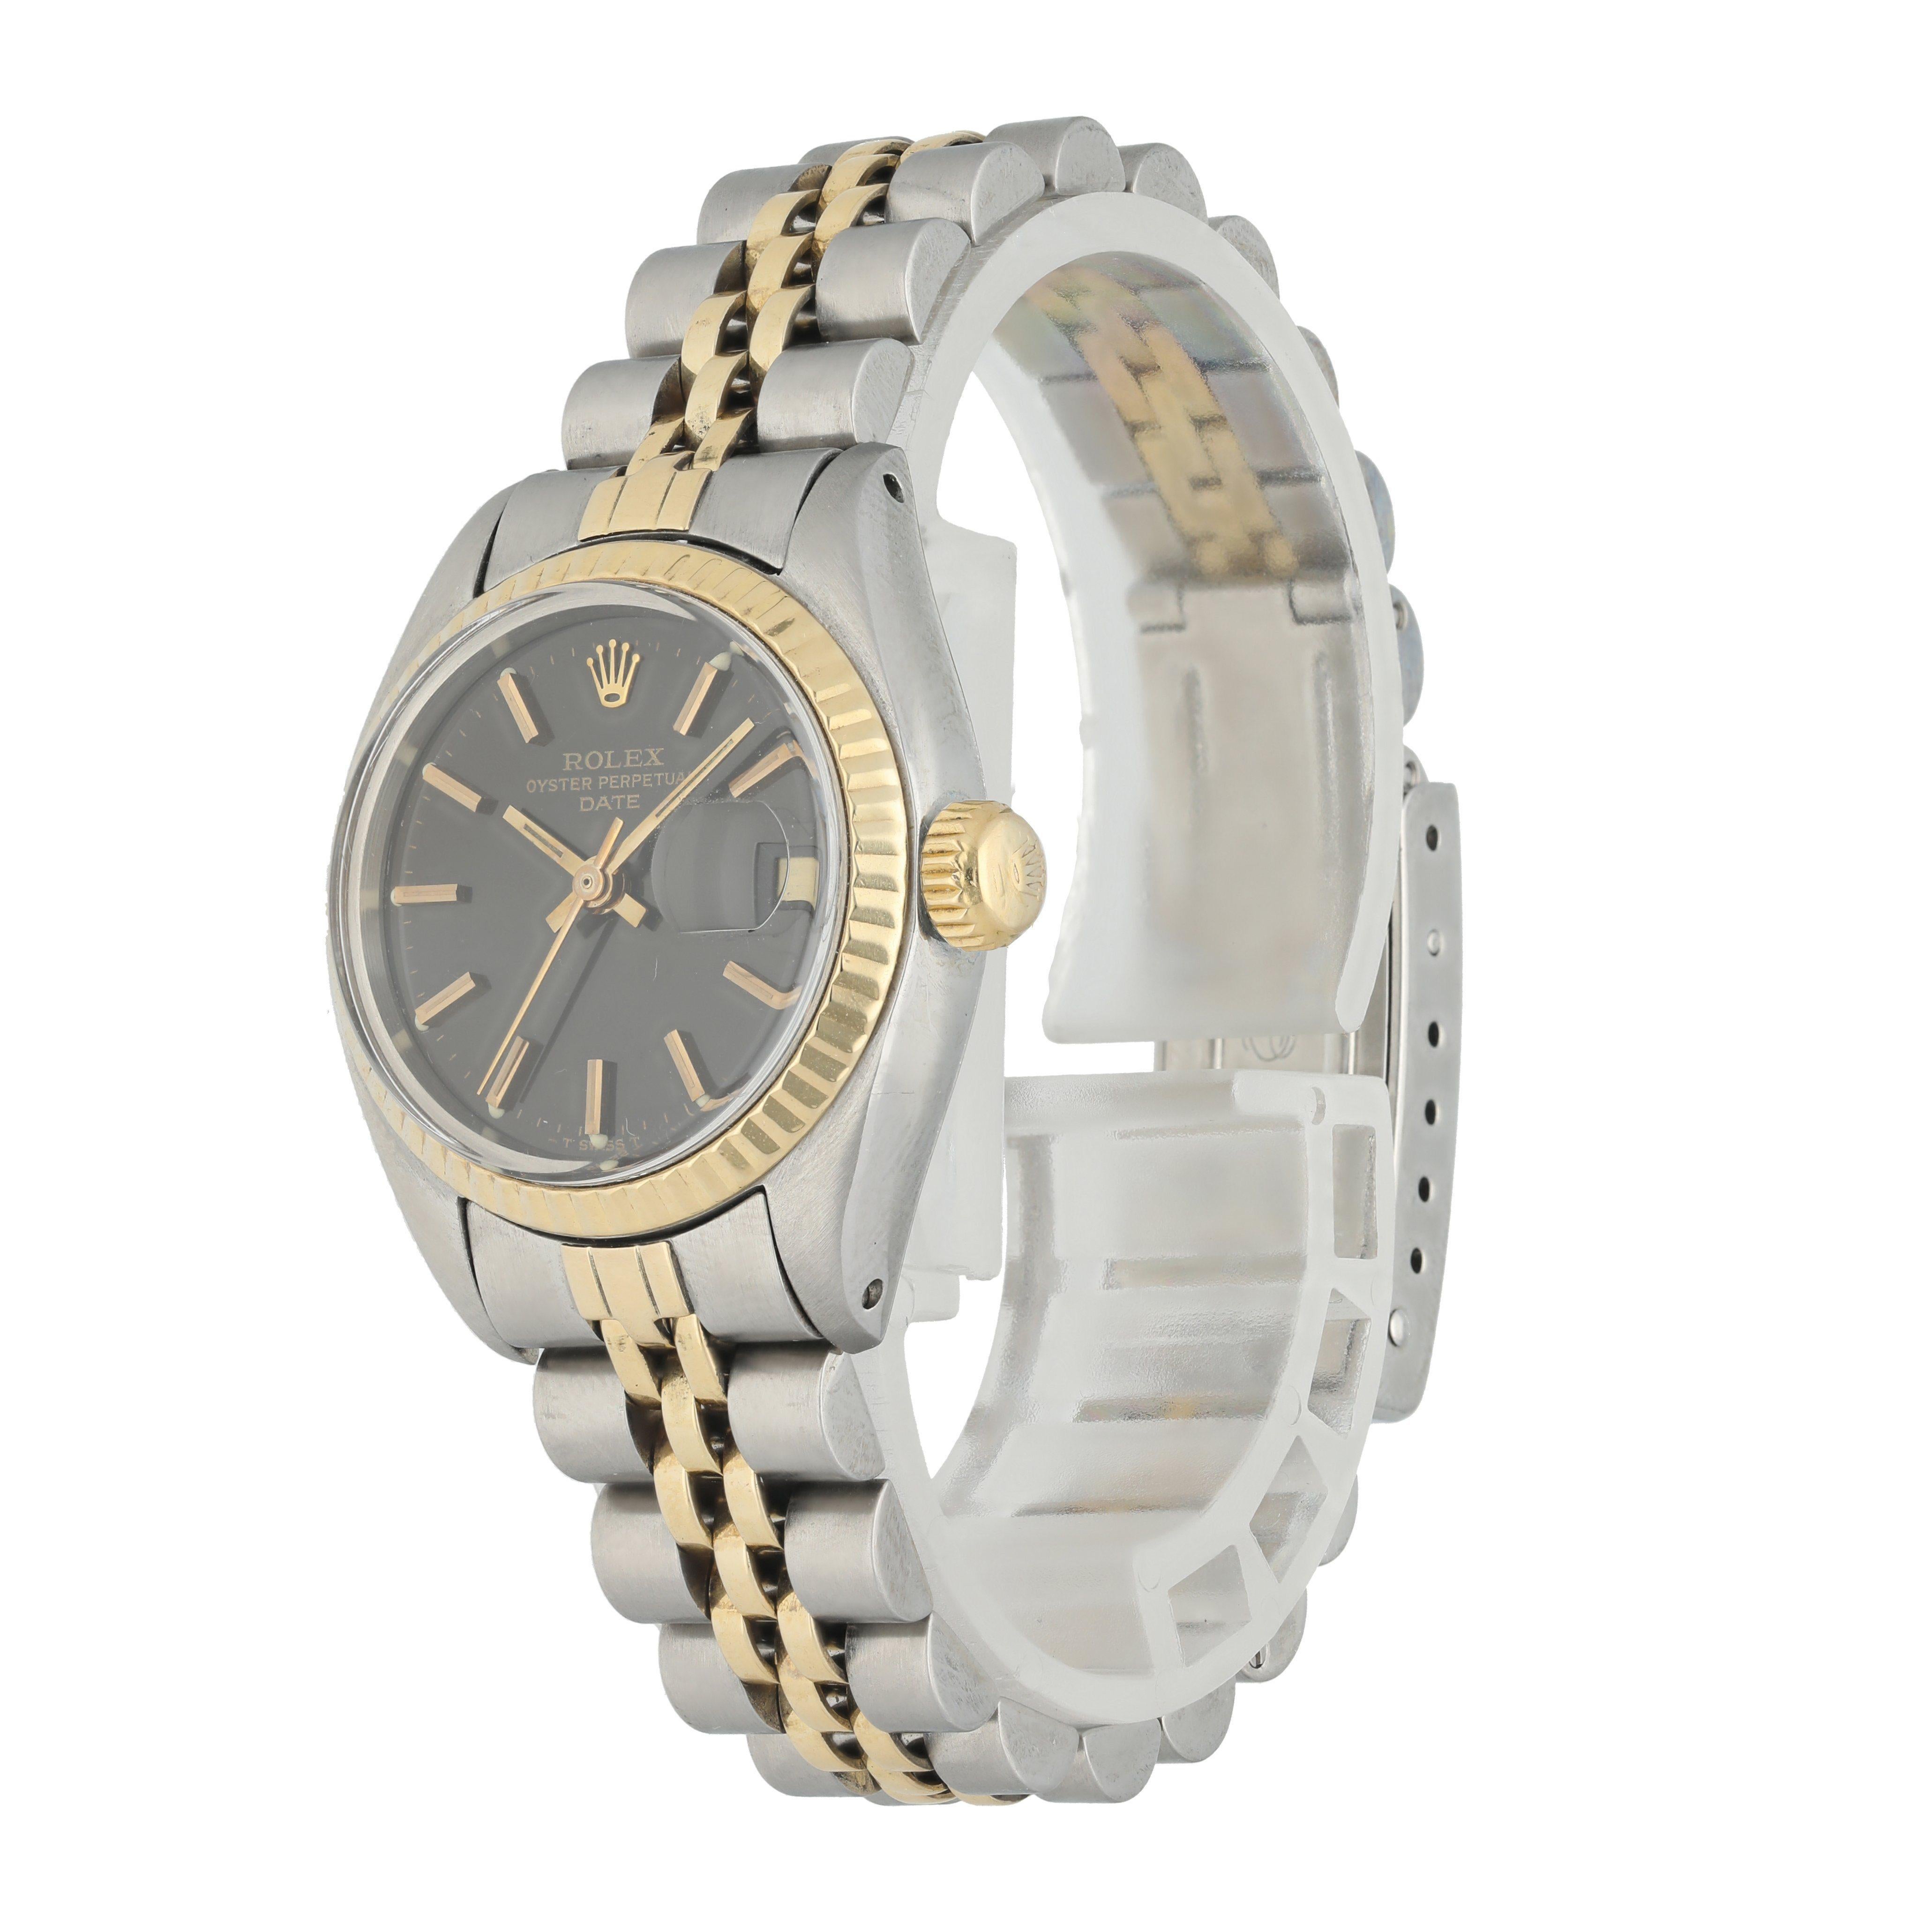 Rolex Datejust 6917 Ladies Watch. 
26mm Stainless Steel case. 
Yellow Gold fluted bezel. 
Black dial with luminous gold hands and Factory set diamond hour markers. 
Minute markers on the outer dial. 
Date display at the 3 o'clock position.